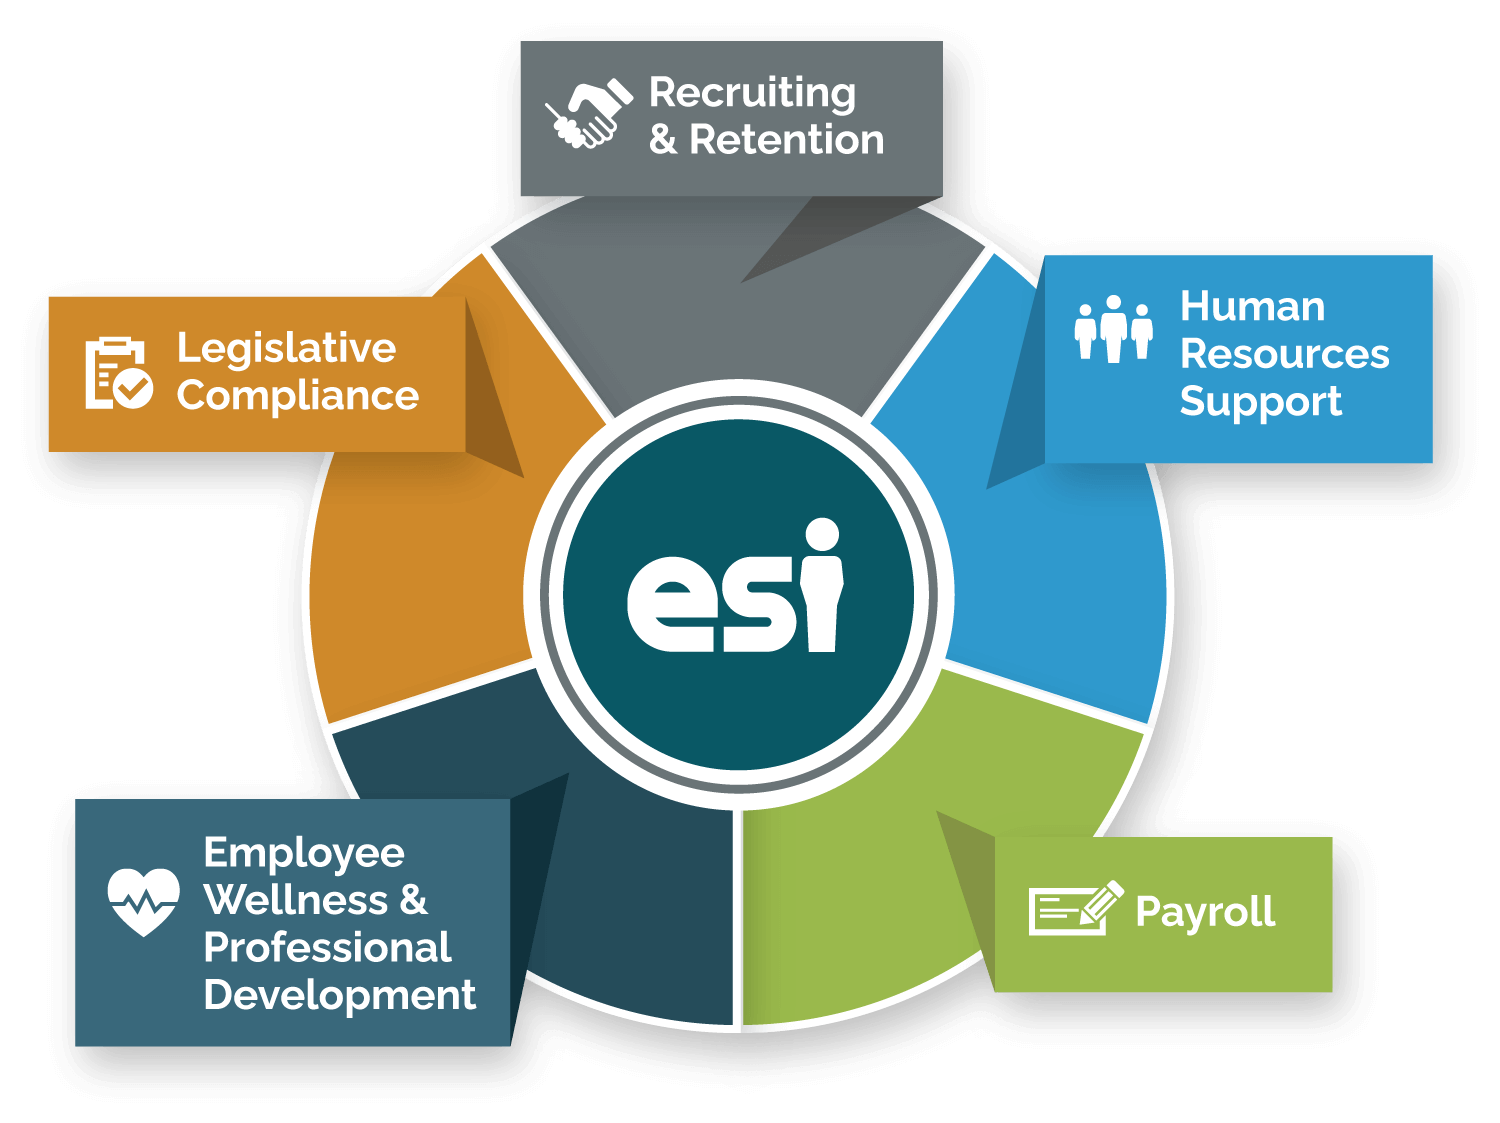 ESI workflow and services